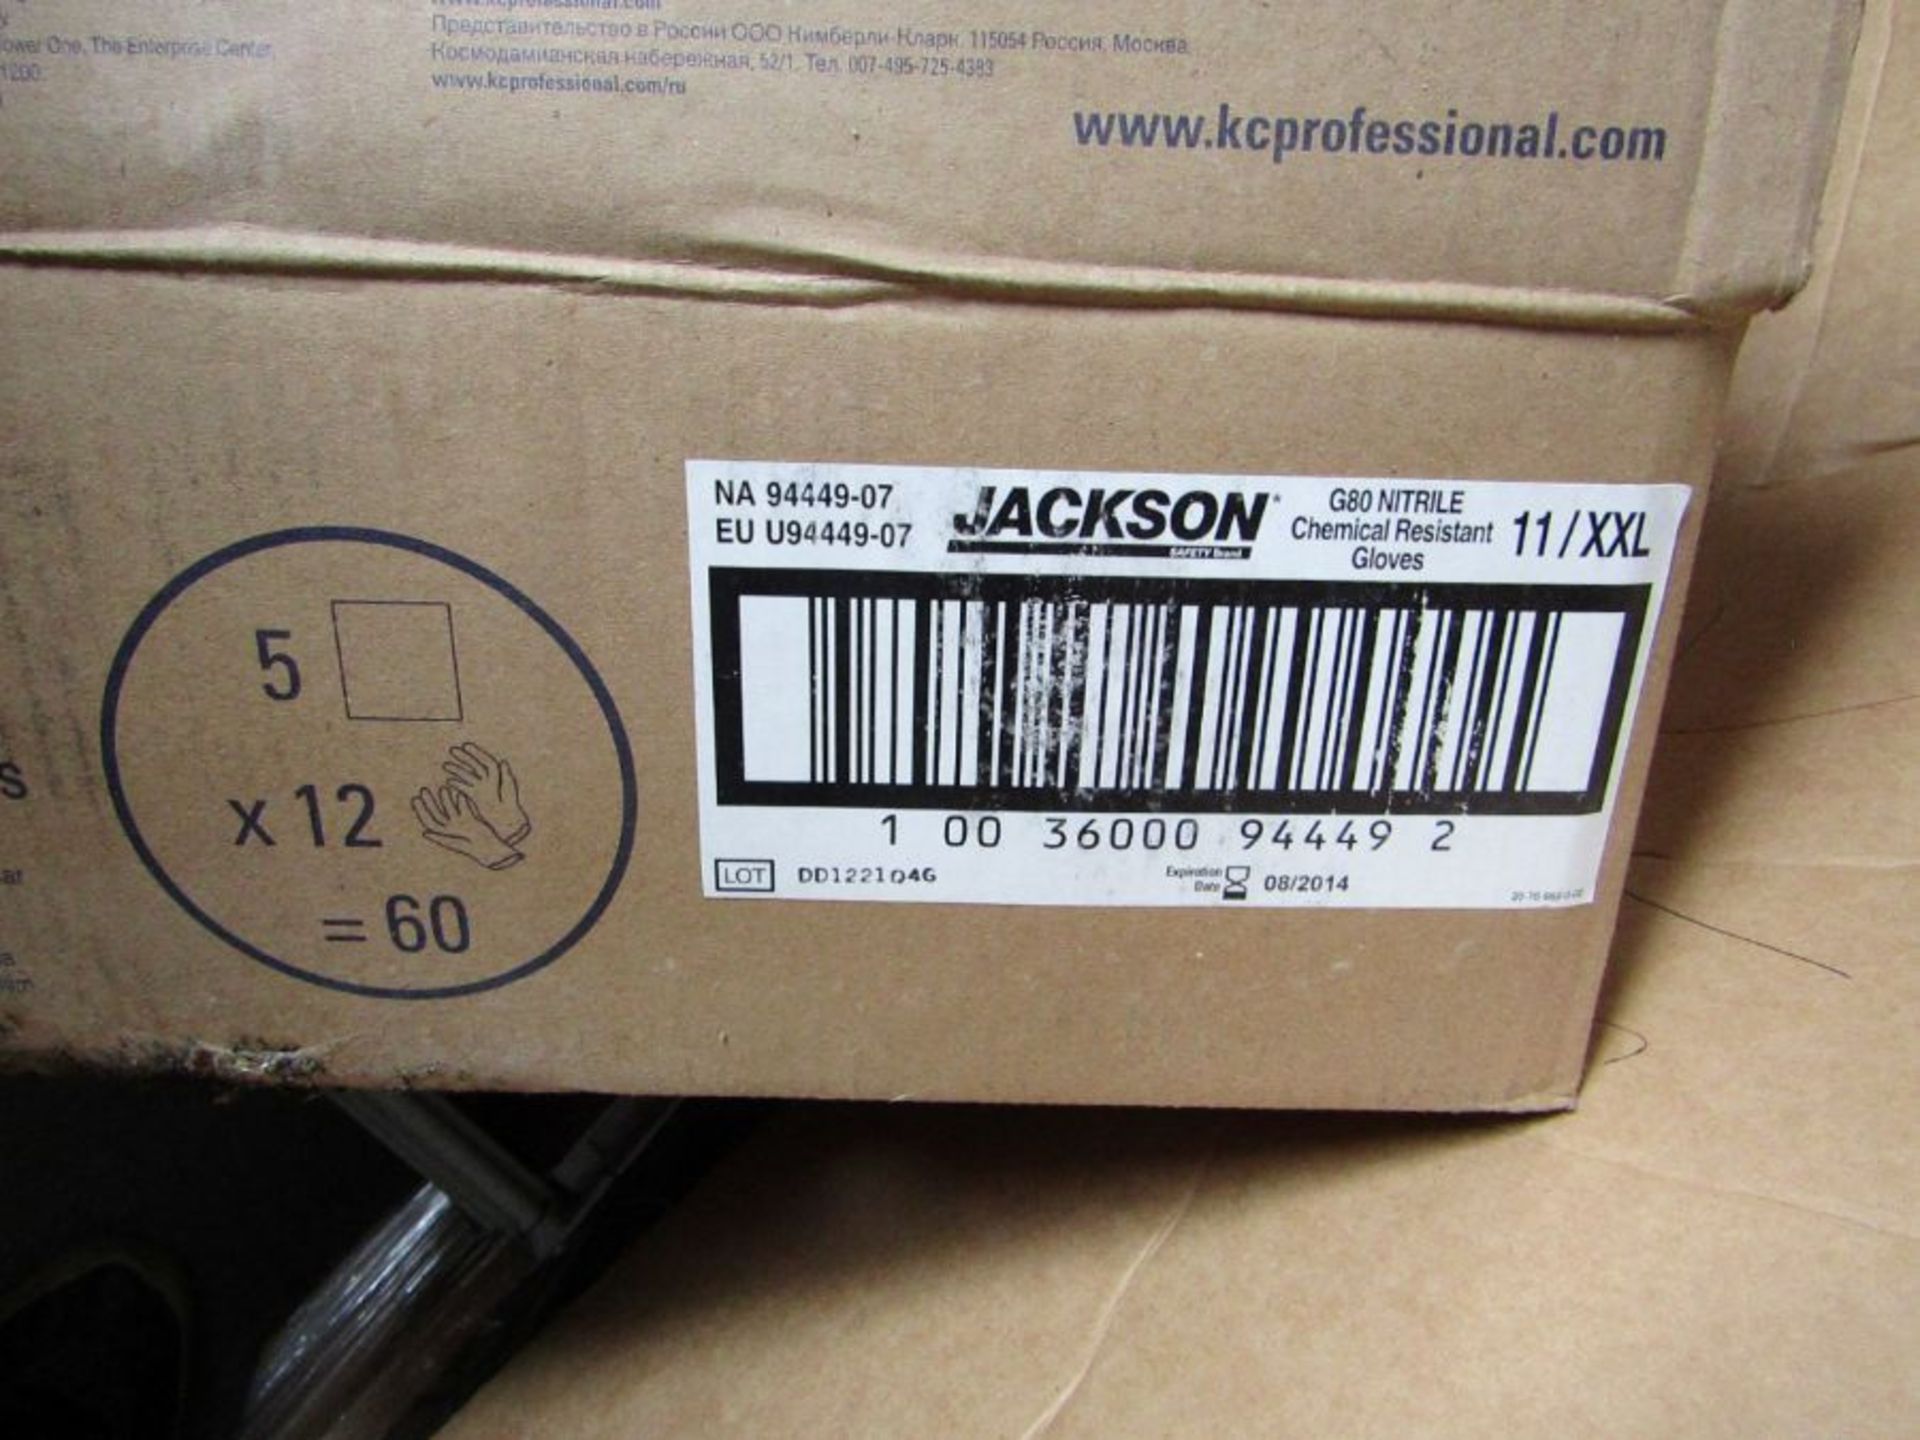 Box of 60 Pairs Jackson G80 Chemical Resistant Nitrile Gloves Size 11 XXL - Table 2000089077 - Image 6 of 6